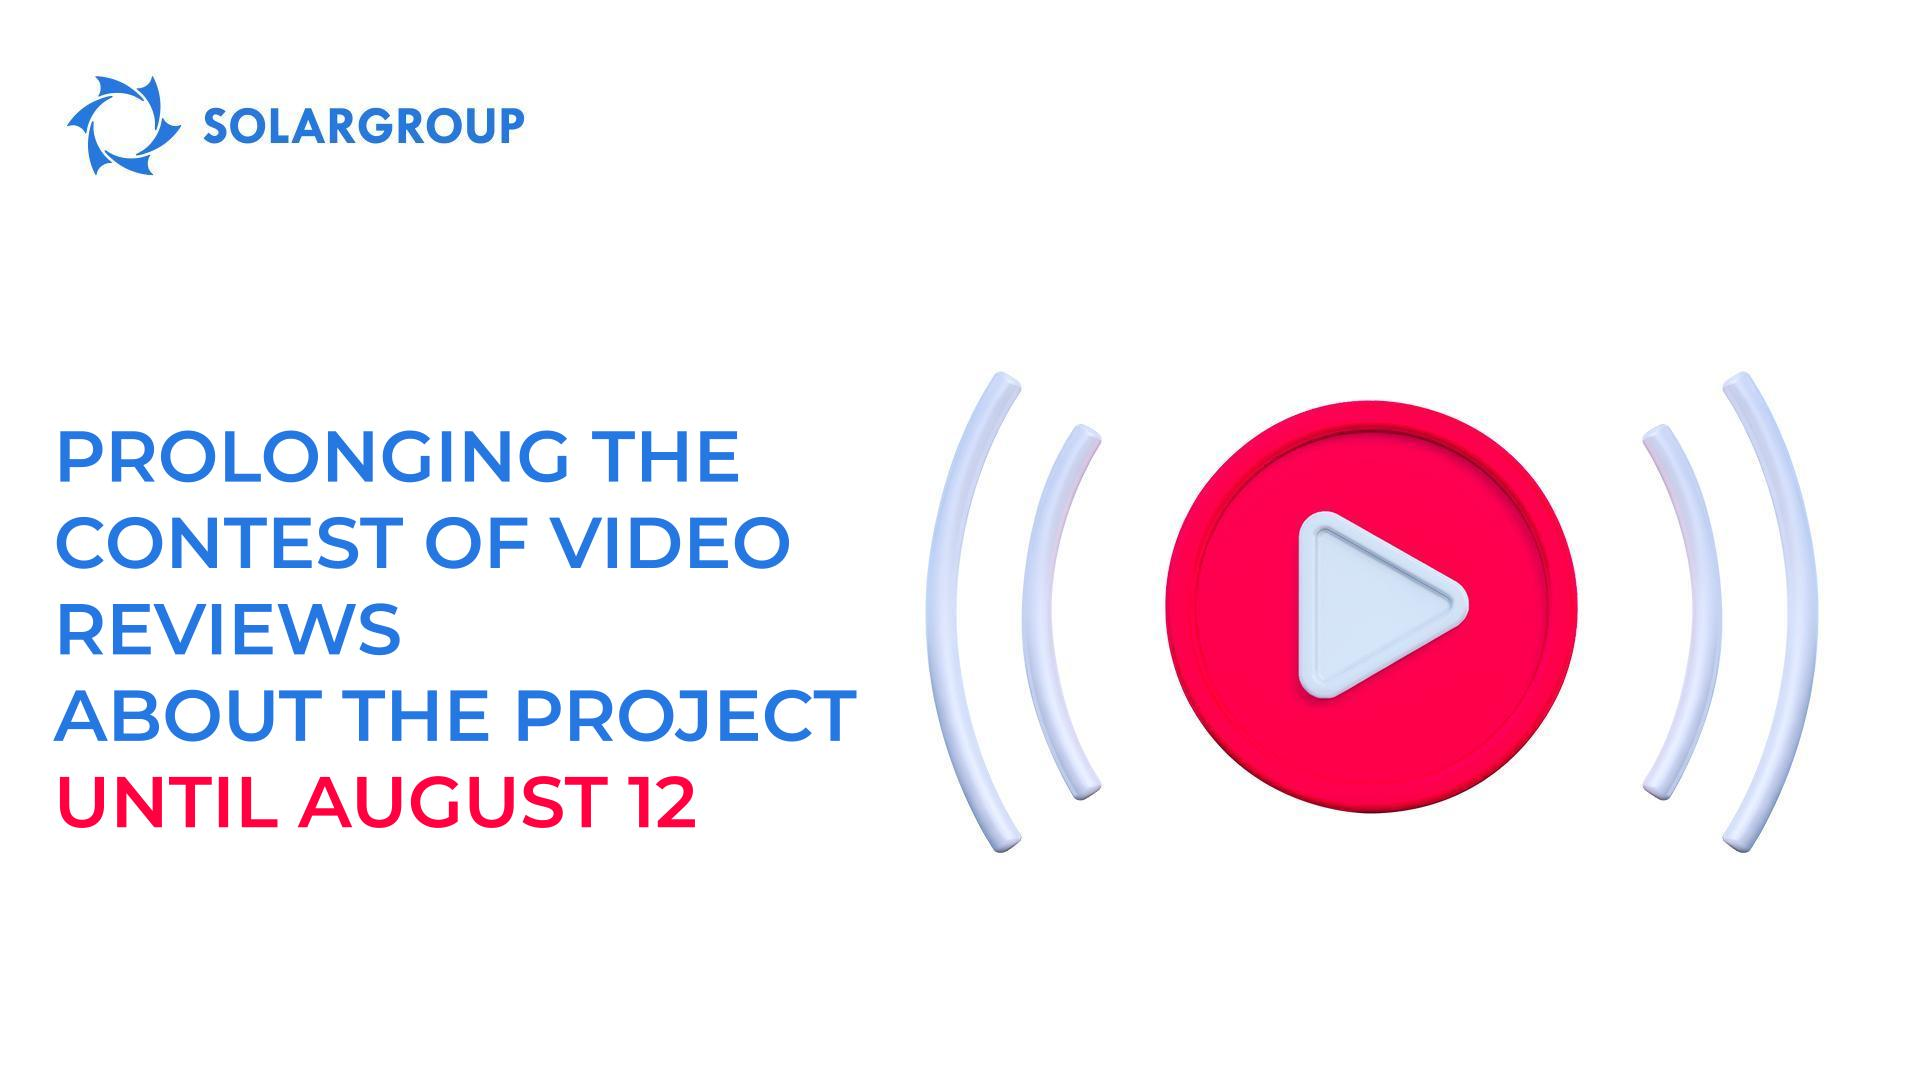 We are extending the deadlines for the contest of video reviews about the project until August 12